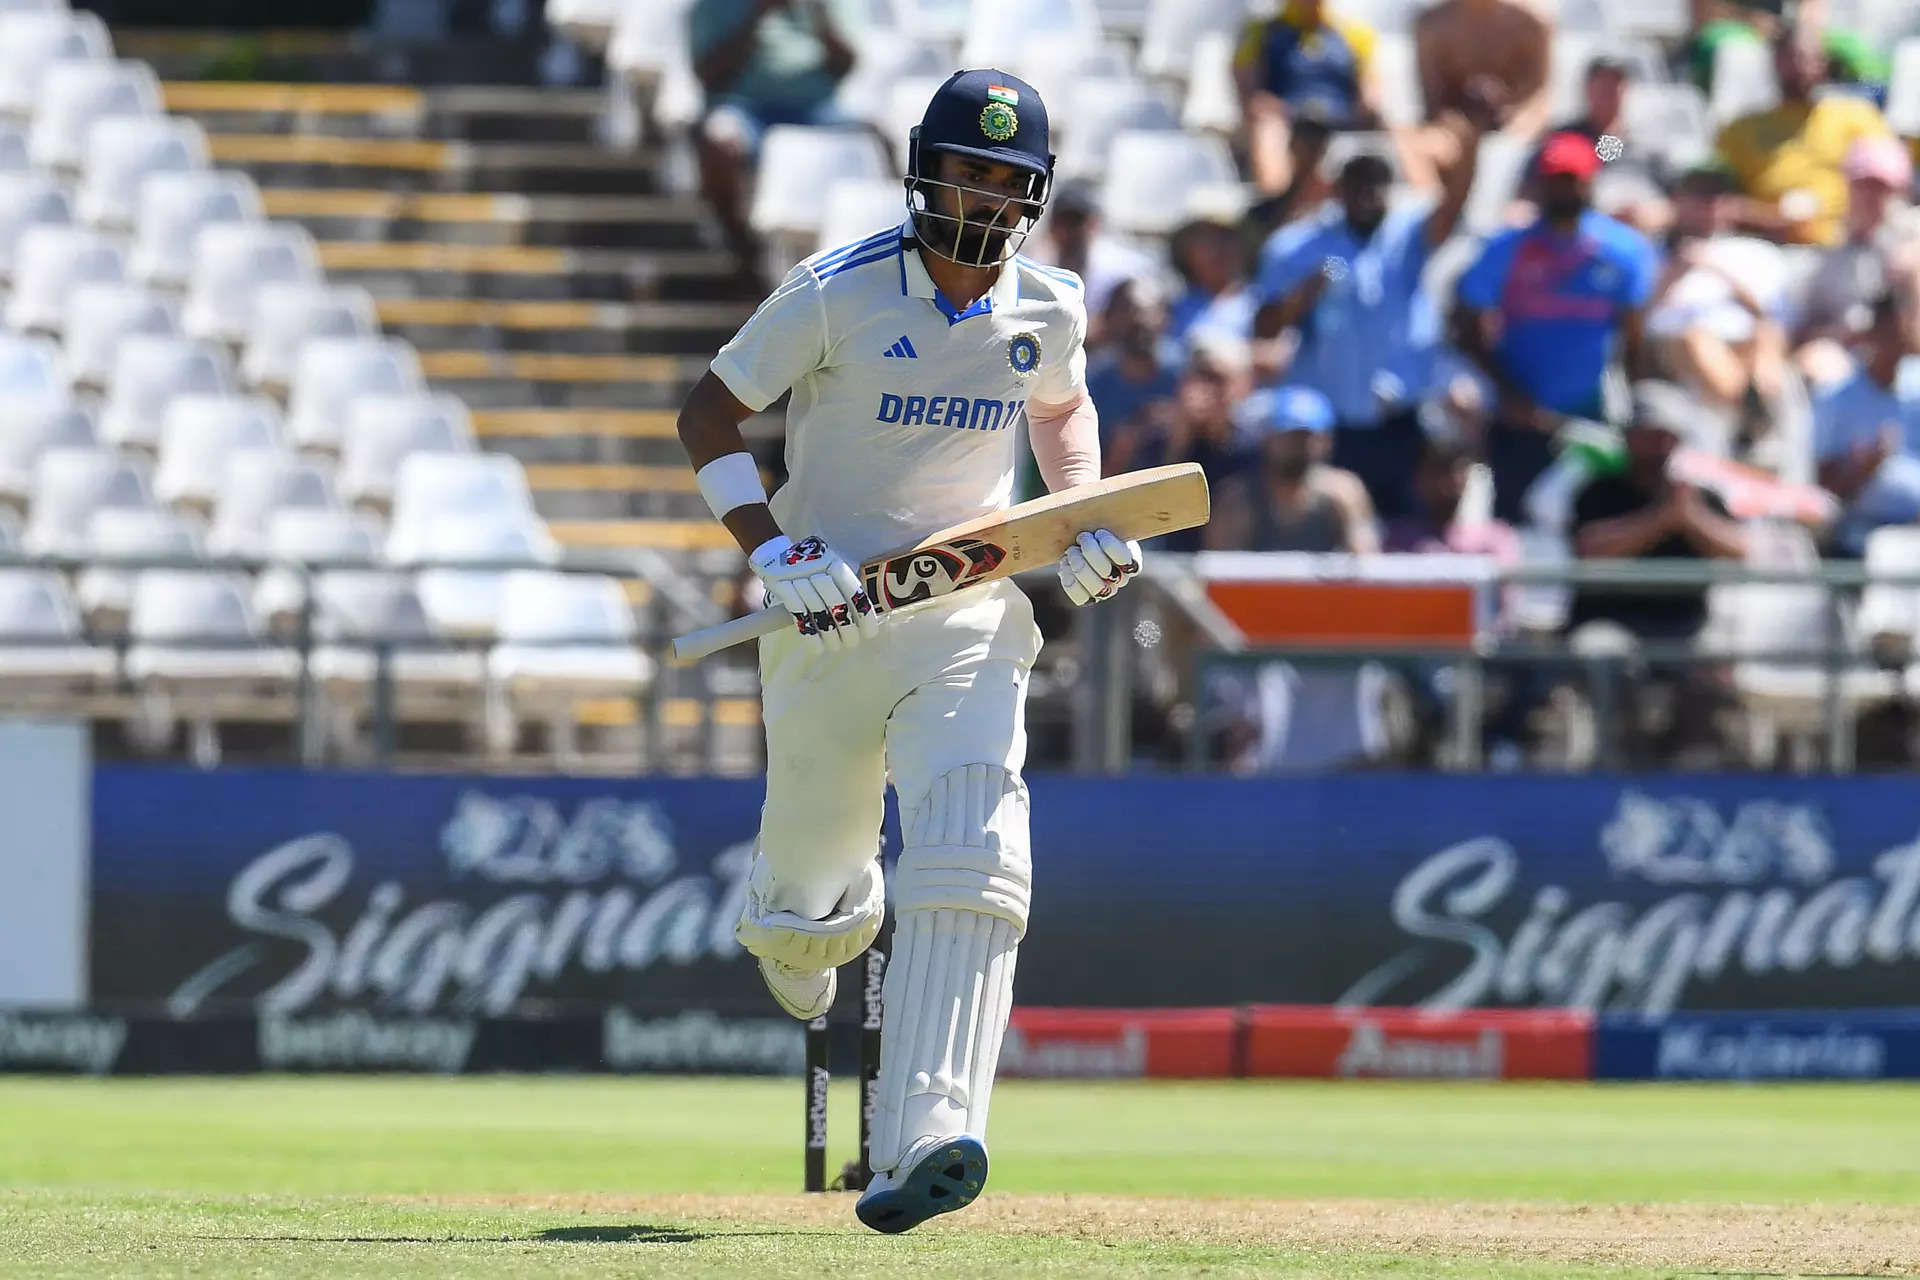 India vs England test: KL Rahul to not wear his wicketkeeping gloves; BCCI eyes Jurel and Bharat for the role 